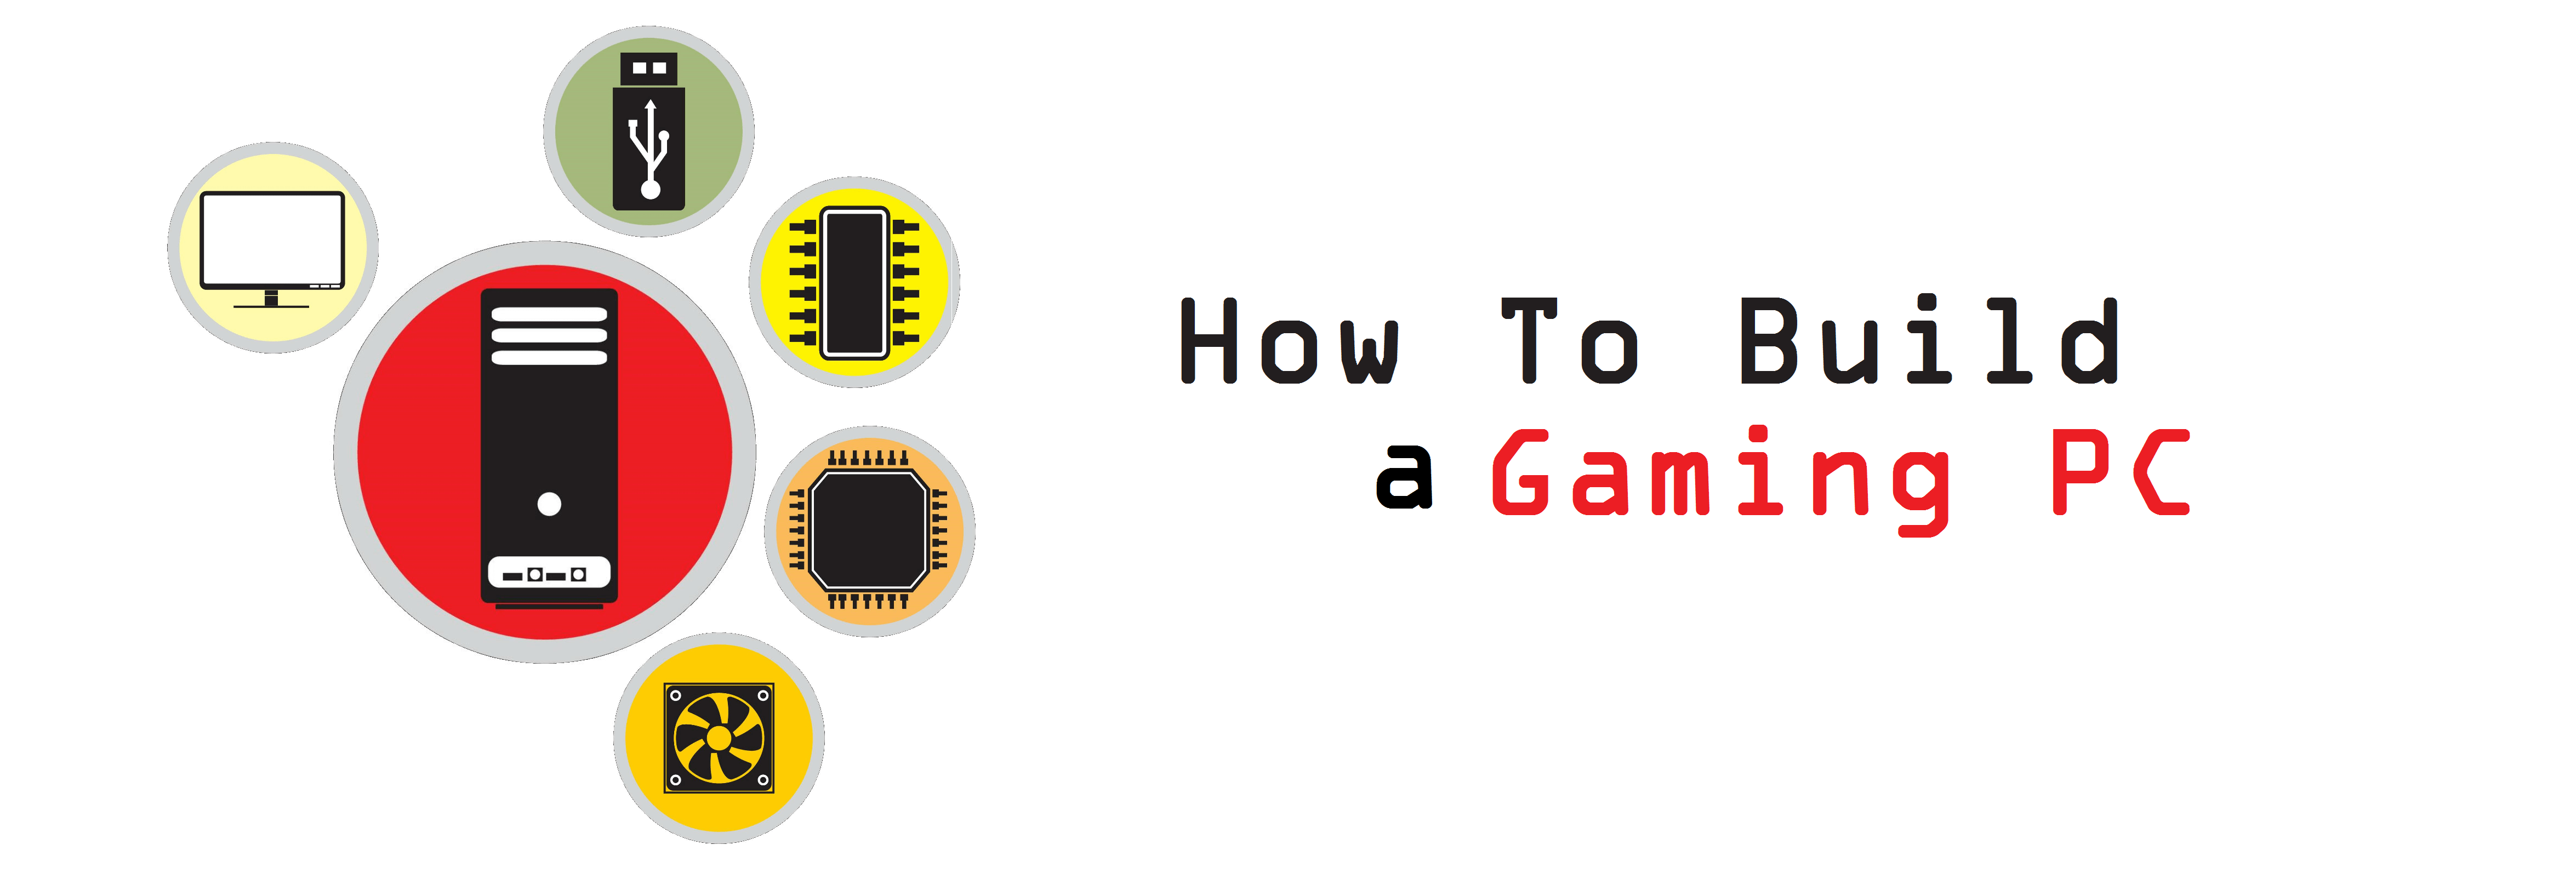 How-to-build-a-gaming-PC-title